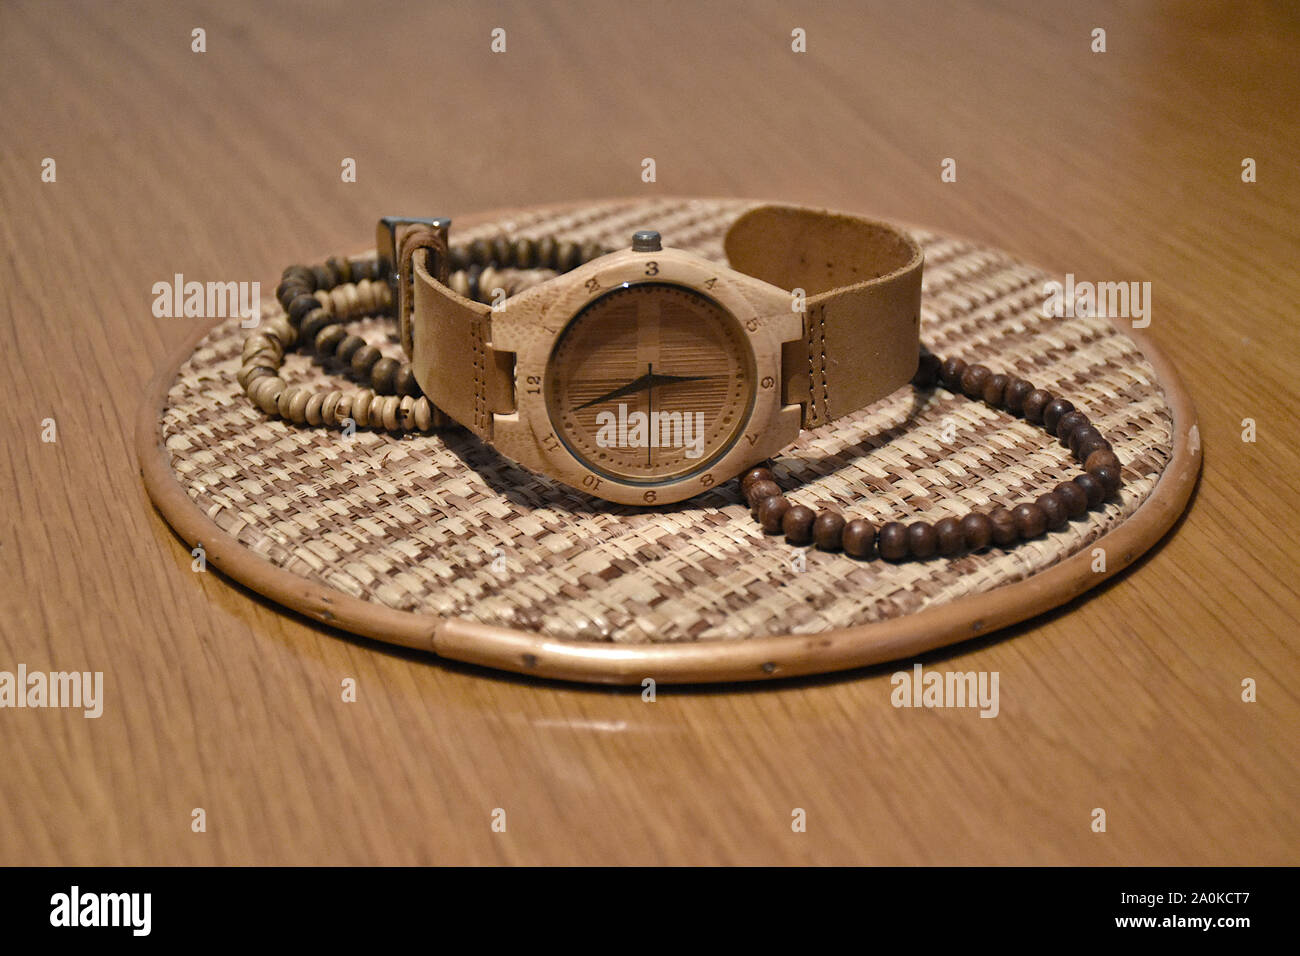 Eco-friendly, plastic-free and hand-made bamboo watch with leather strap from Thailand on a braided hemp plate surrounded by wooden bracelets on a woo Stock Photo